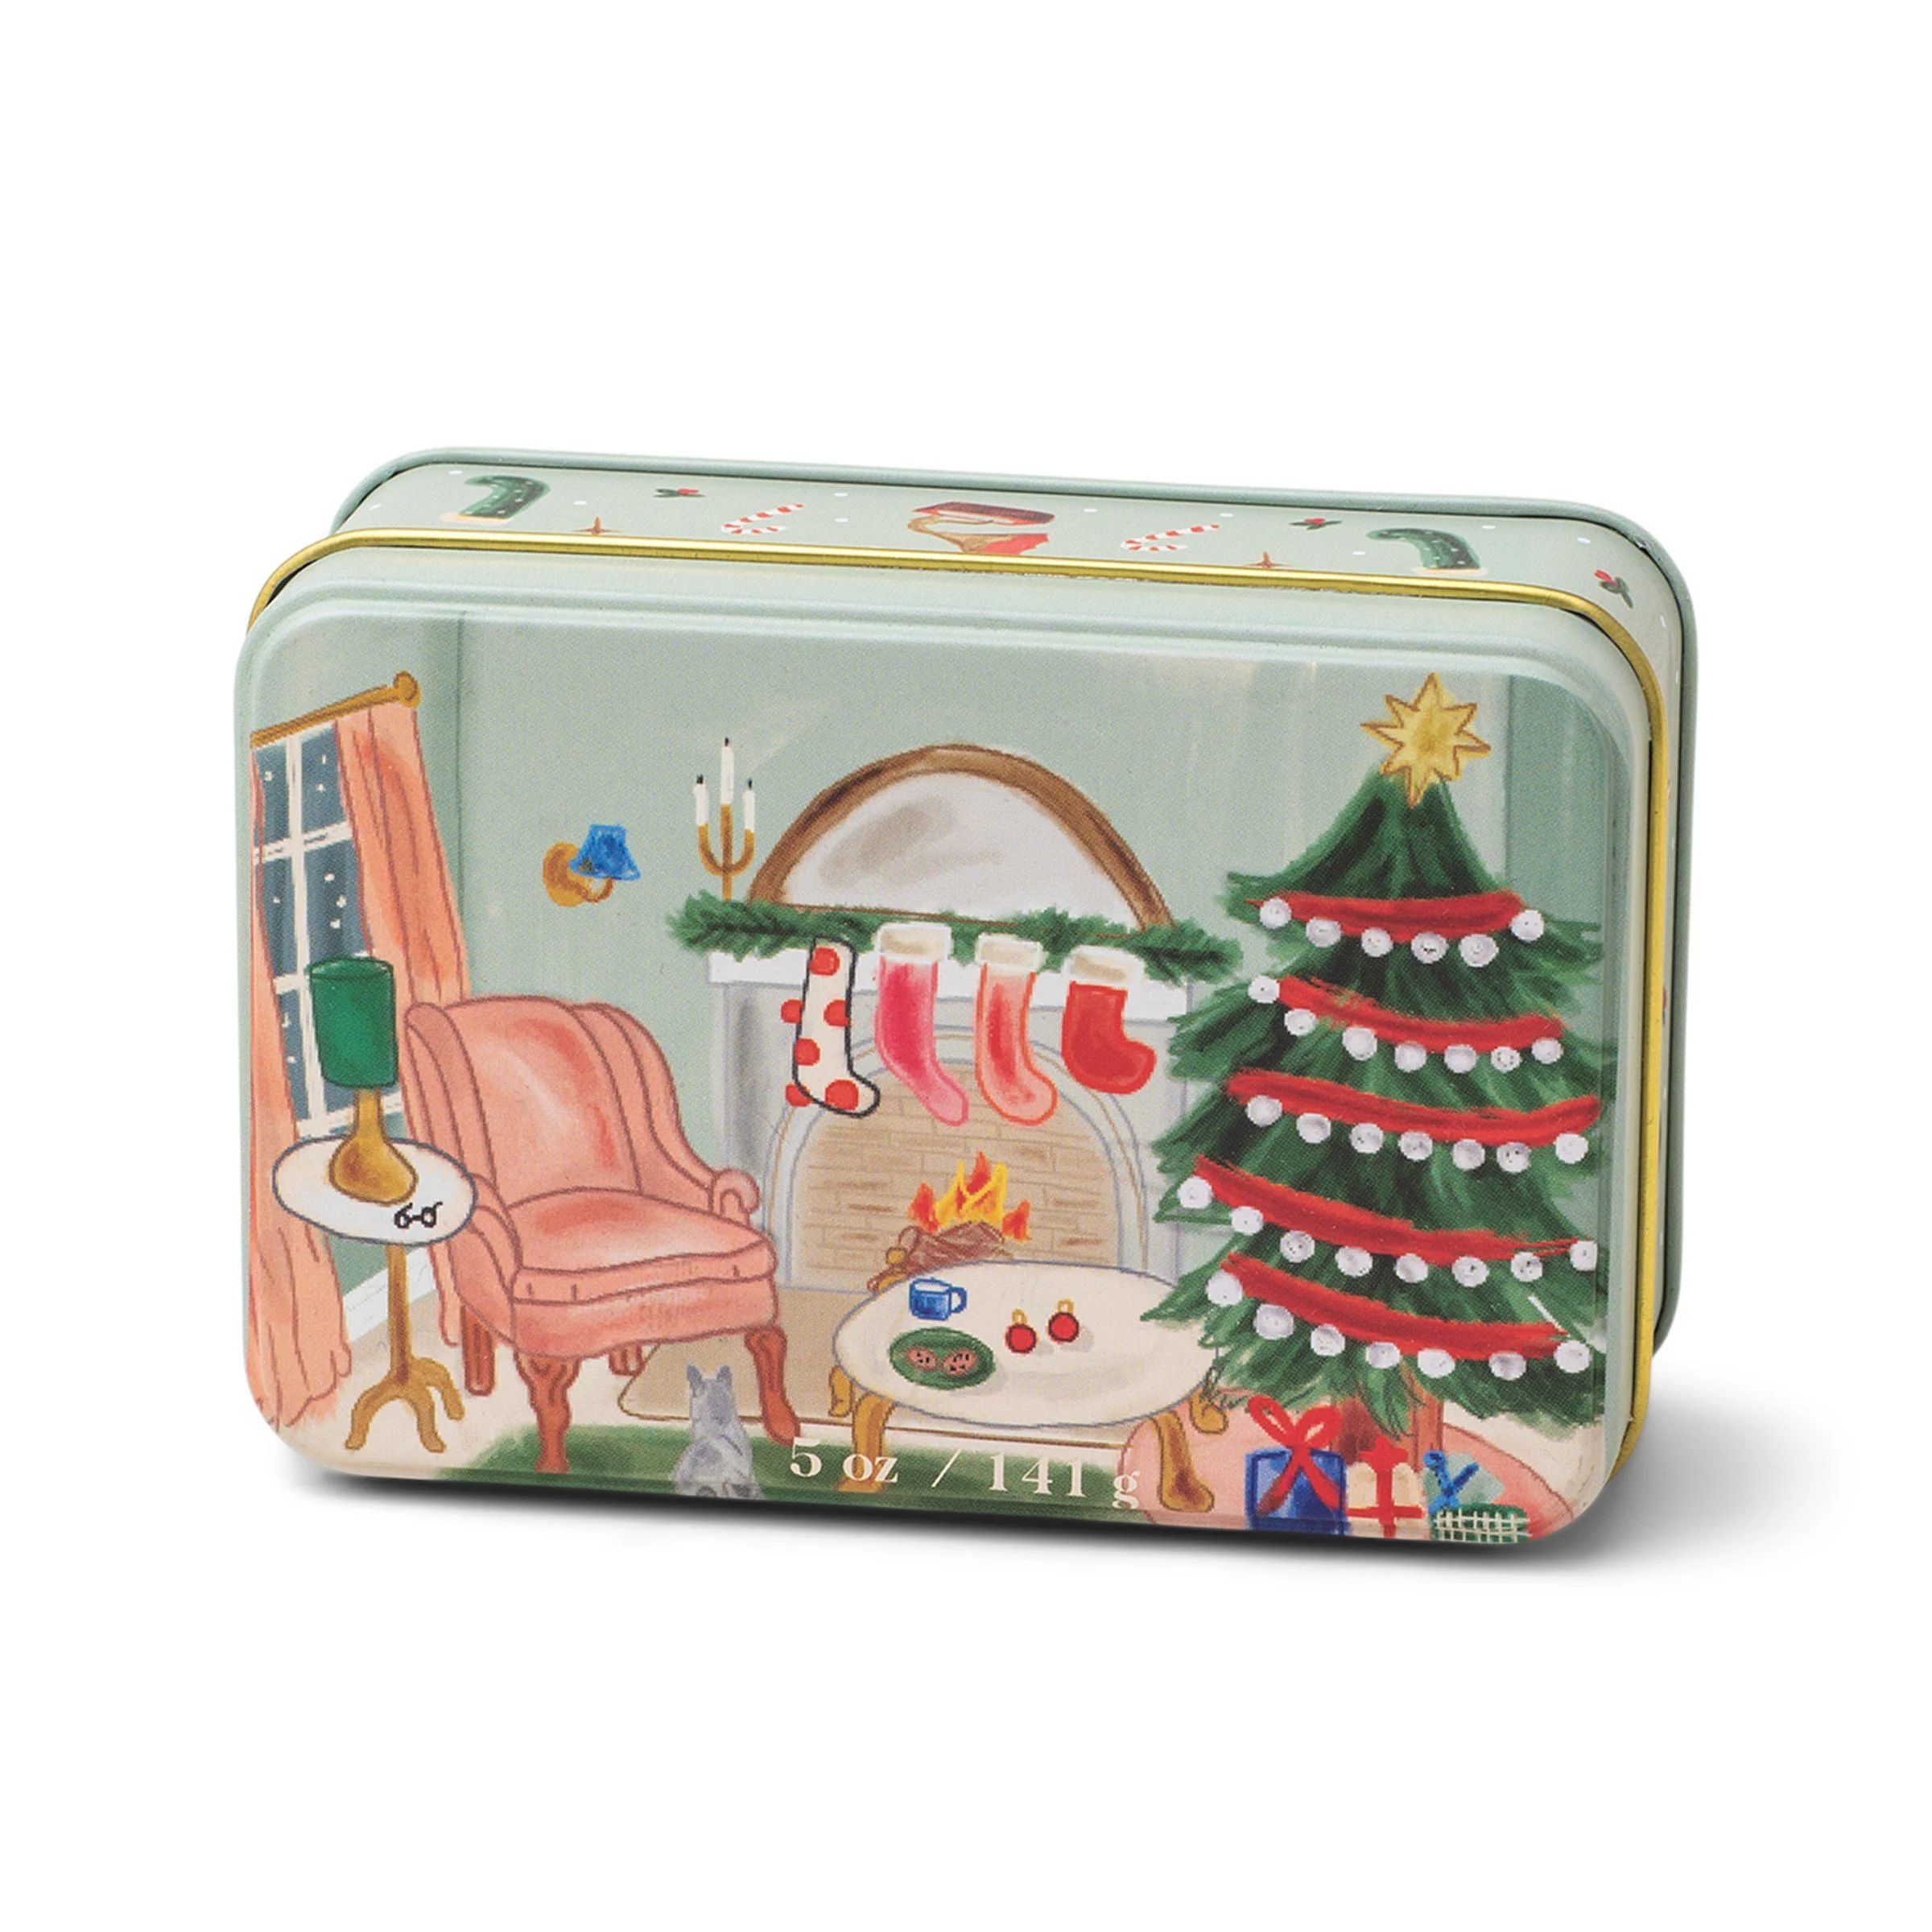 Holiday 5 oz Candle Tin - Persimmon + Chesnut | Paddywax